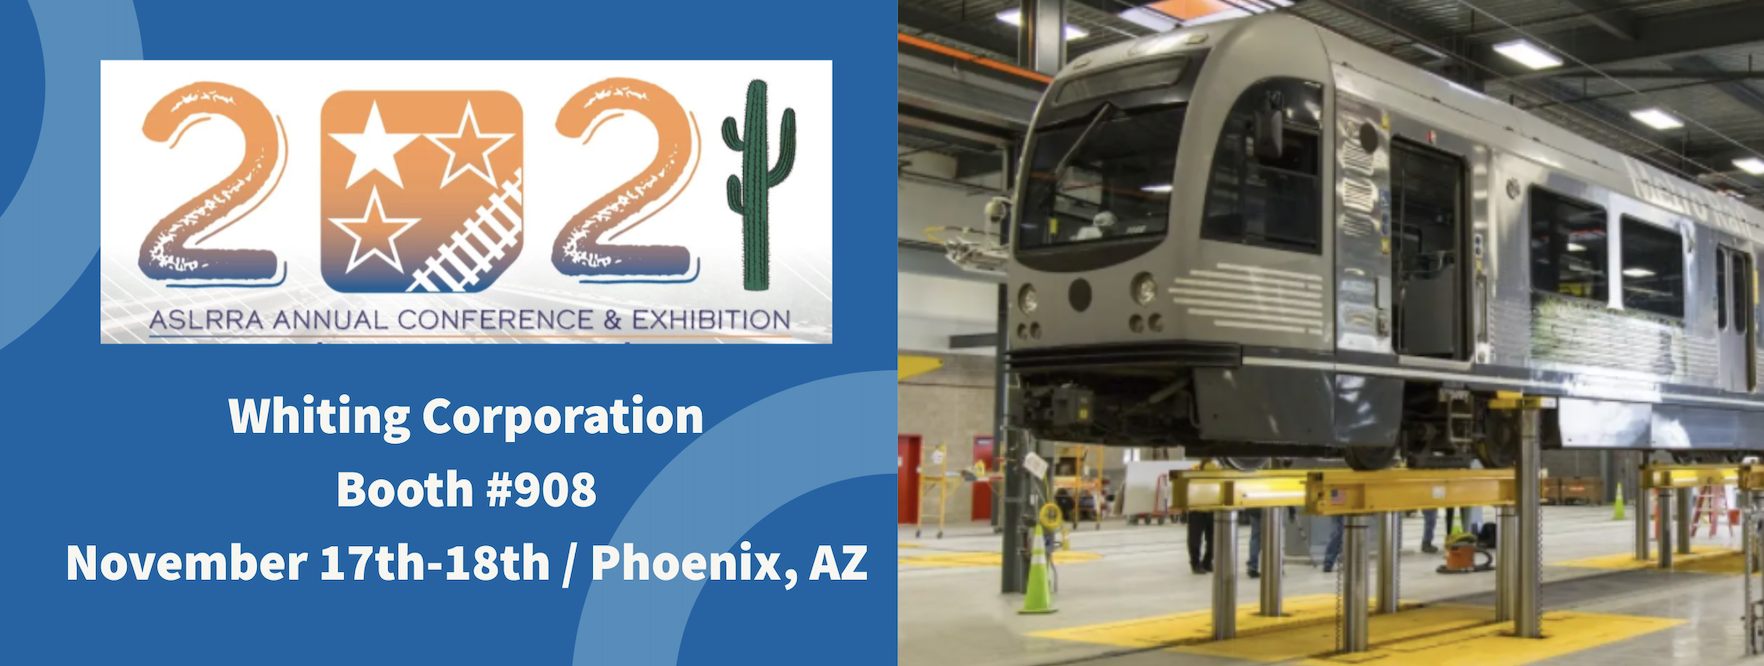 Learn More about Rail Equipment at the ASLRRA Exhibition